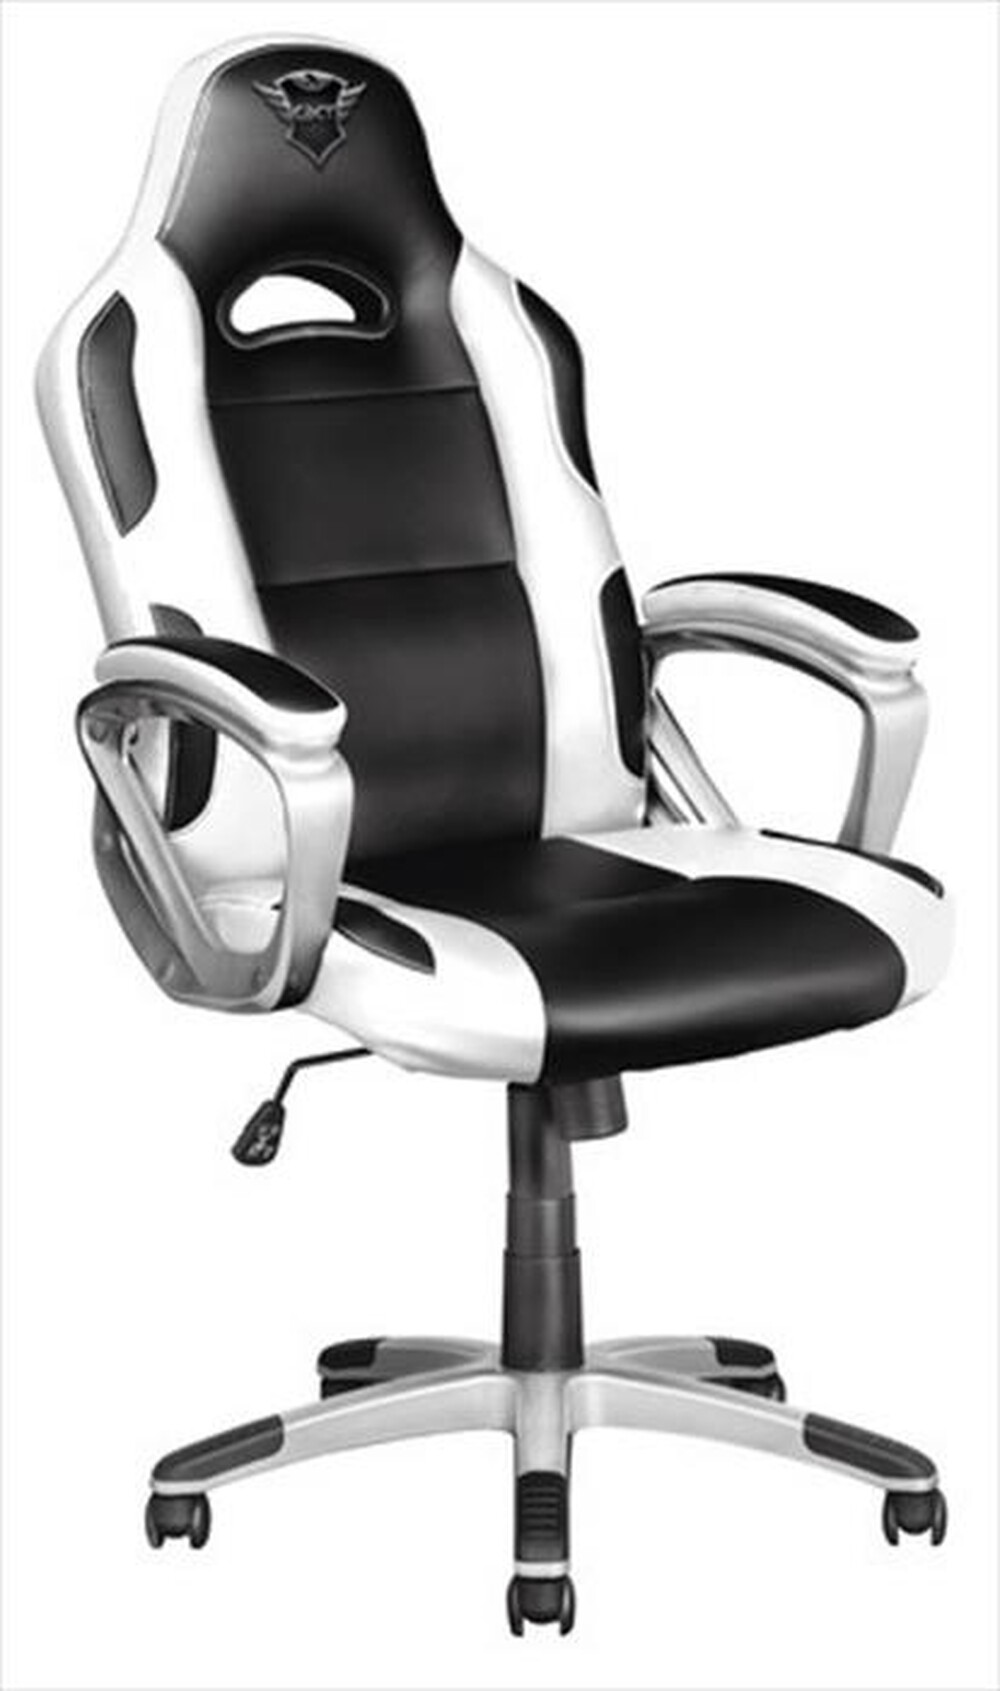 "TRUST - Sedia gaming GXT705W RYON CHAIR-White"